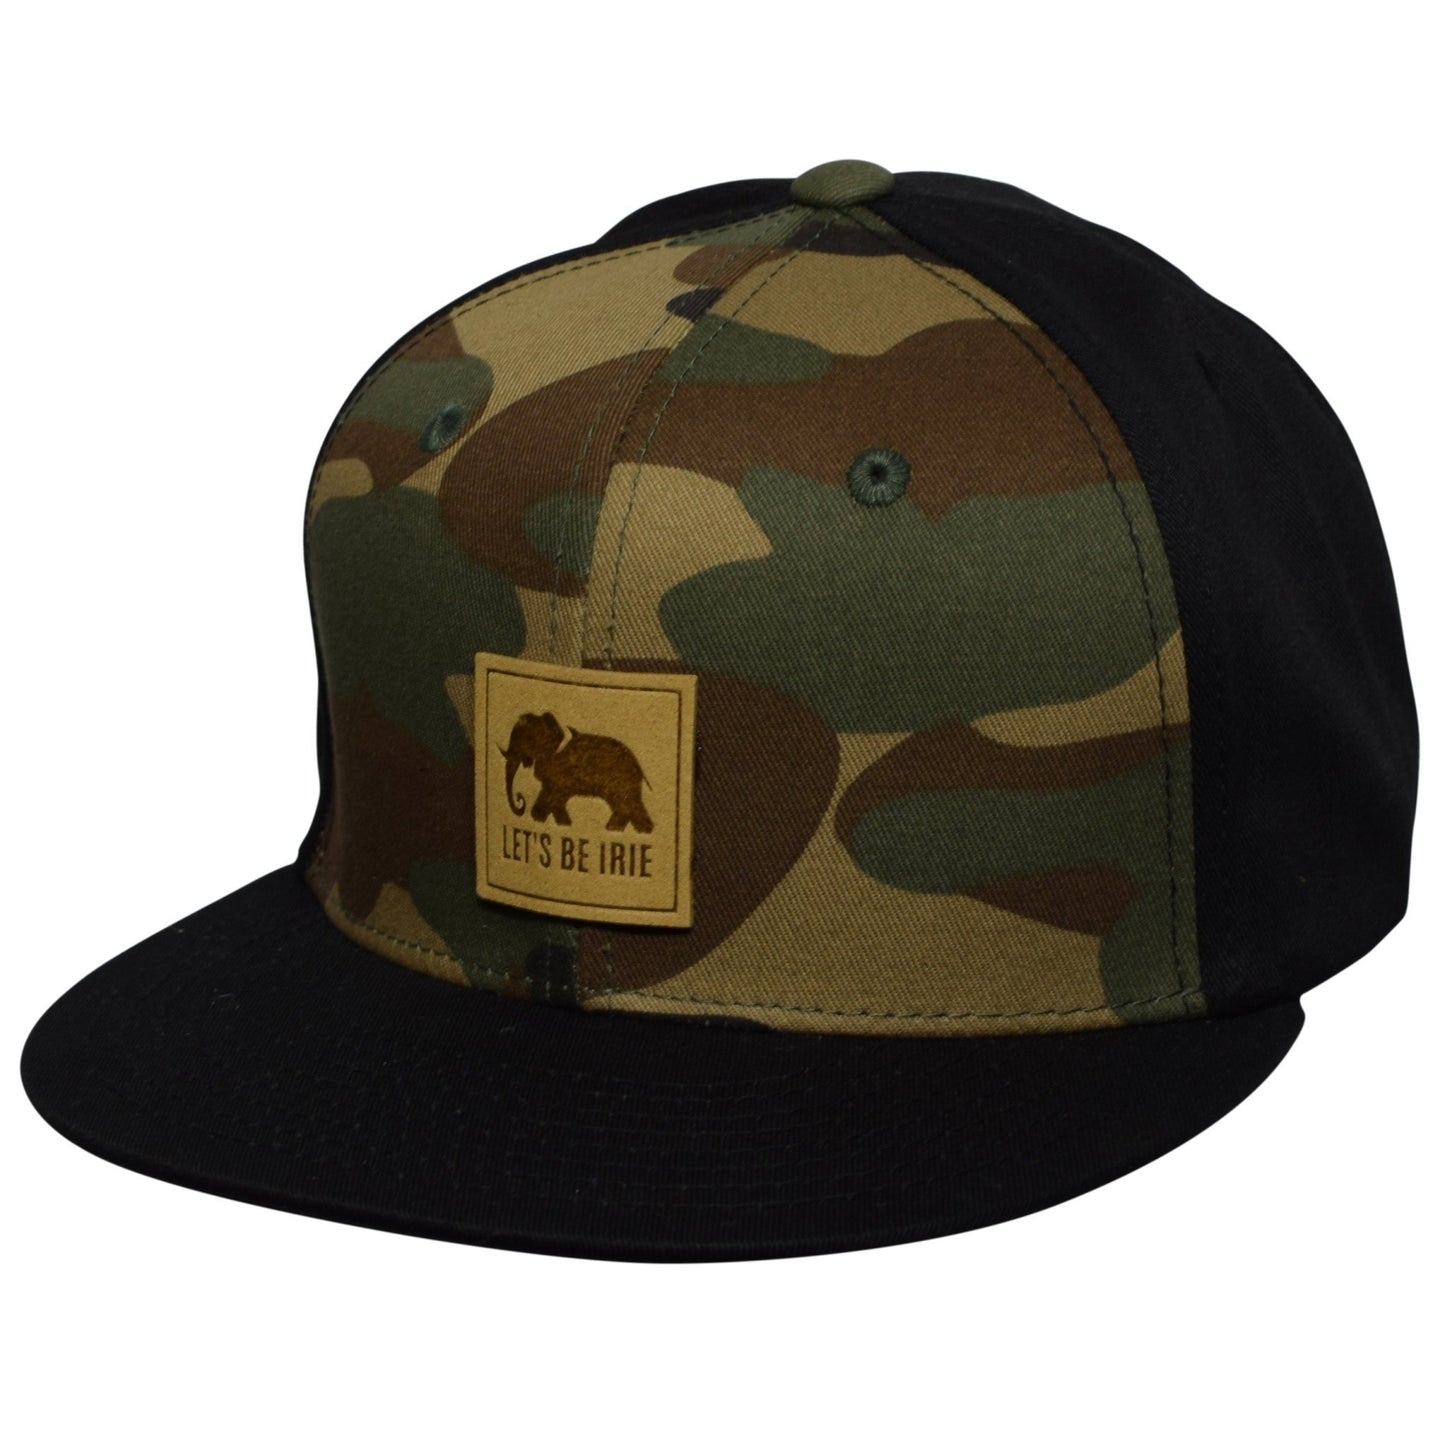 "Let's Be Irie" Elephant Logo Snapback Hat in Camouflage & Black